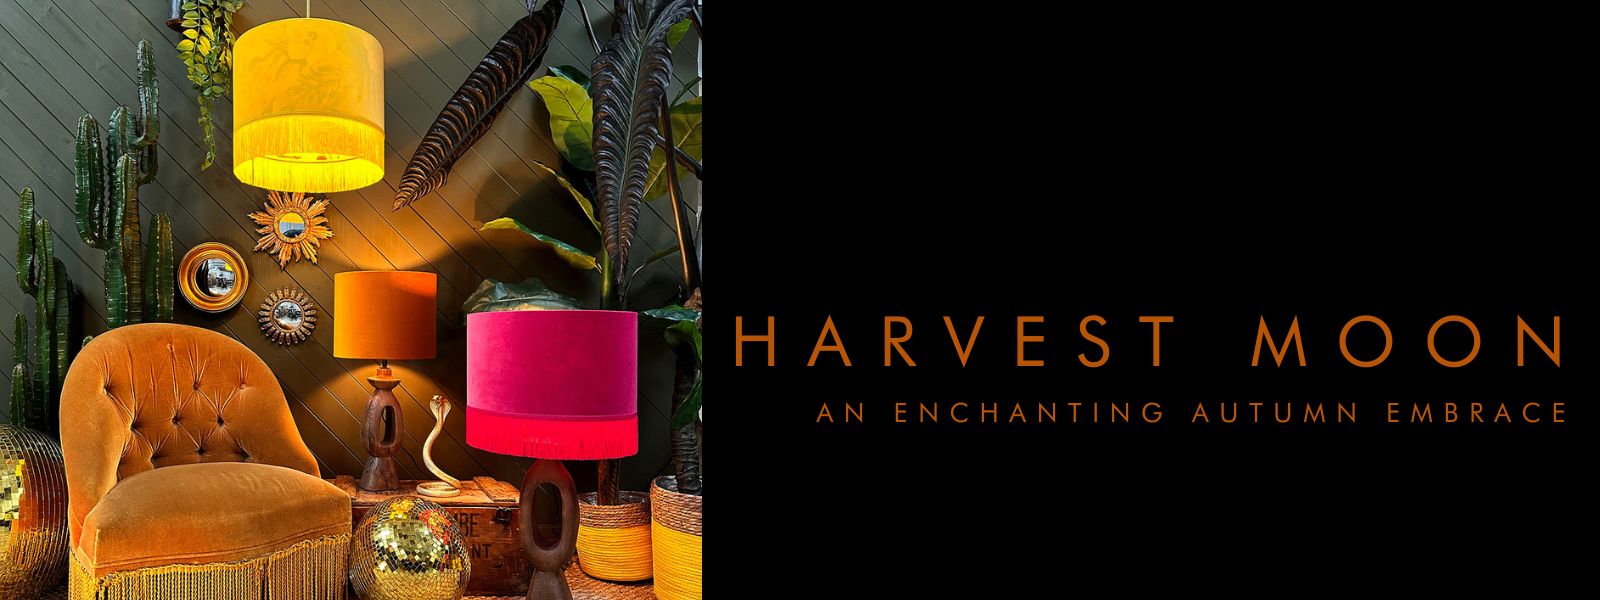 Harvest Moon Silhouette Lampshade and Wallpaper launch